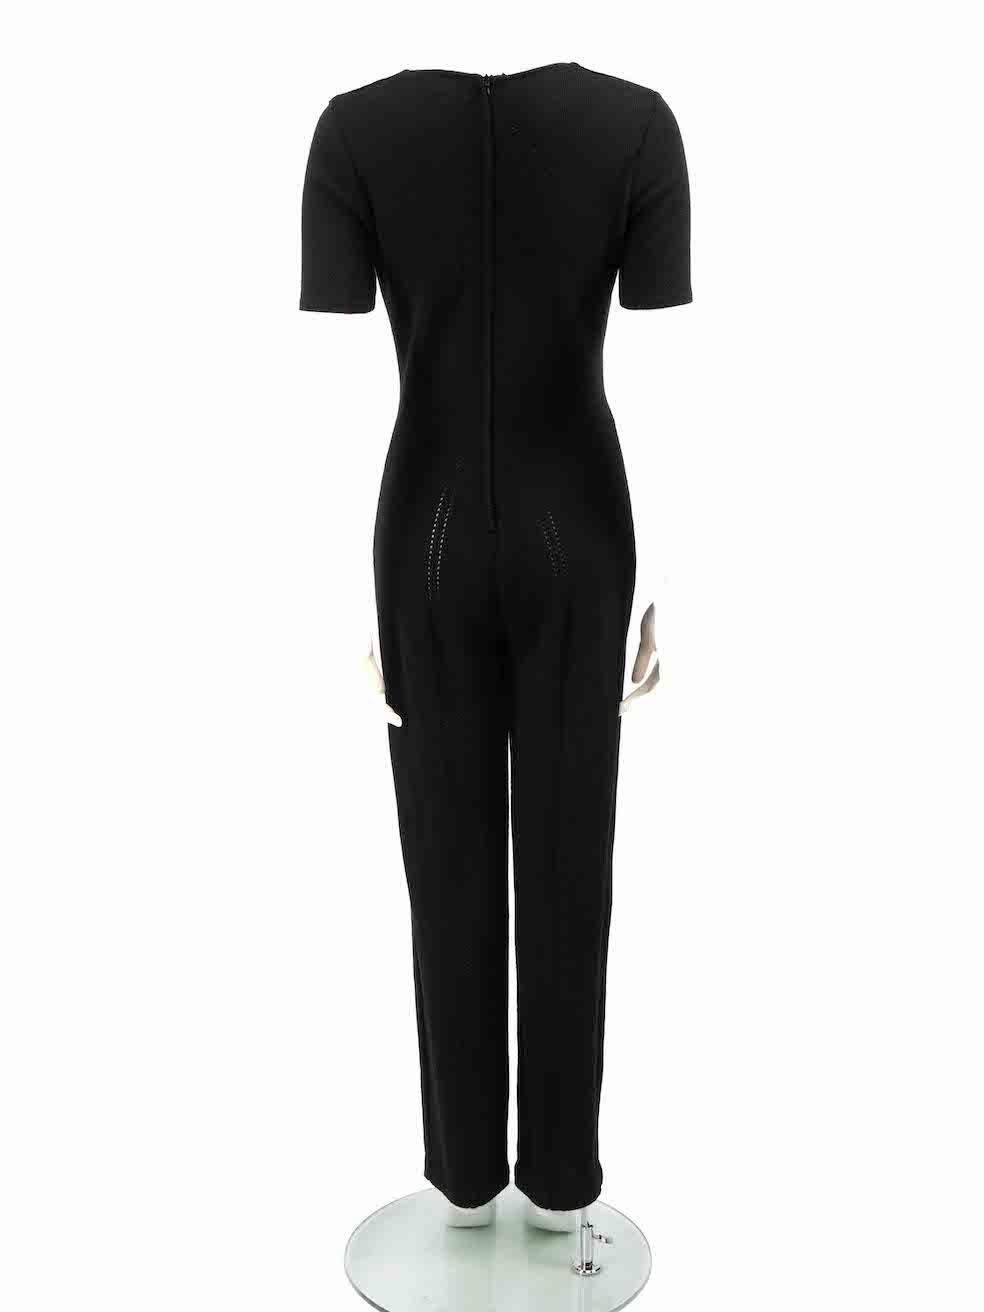 Gianfranco Ferré Black Wool Short Sleeve Jumpsuit Size S In Good Condition For Sale In London, GB